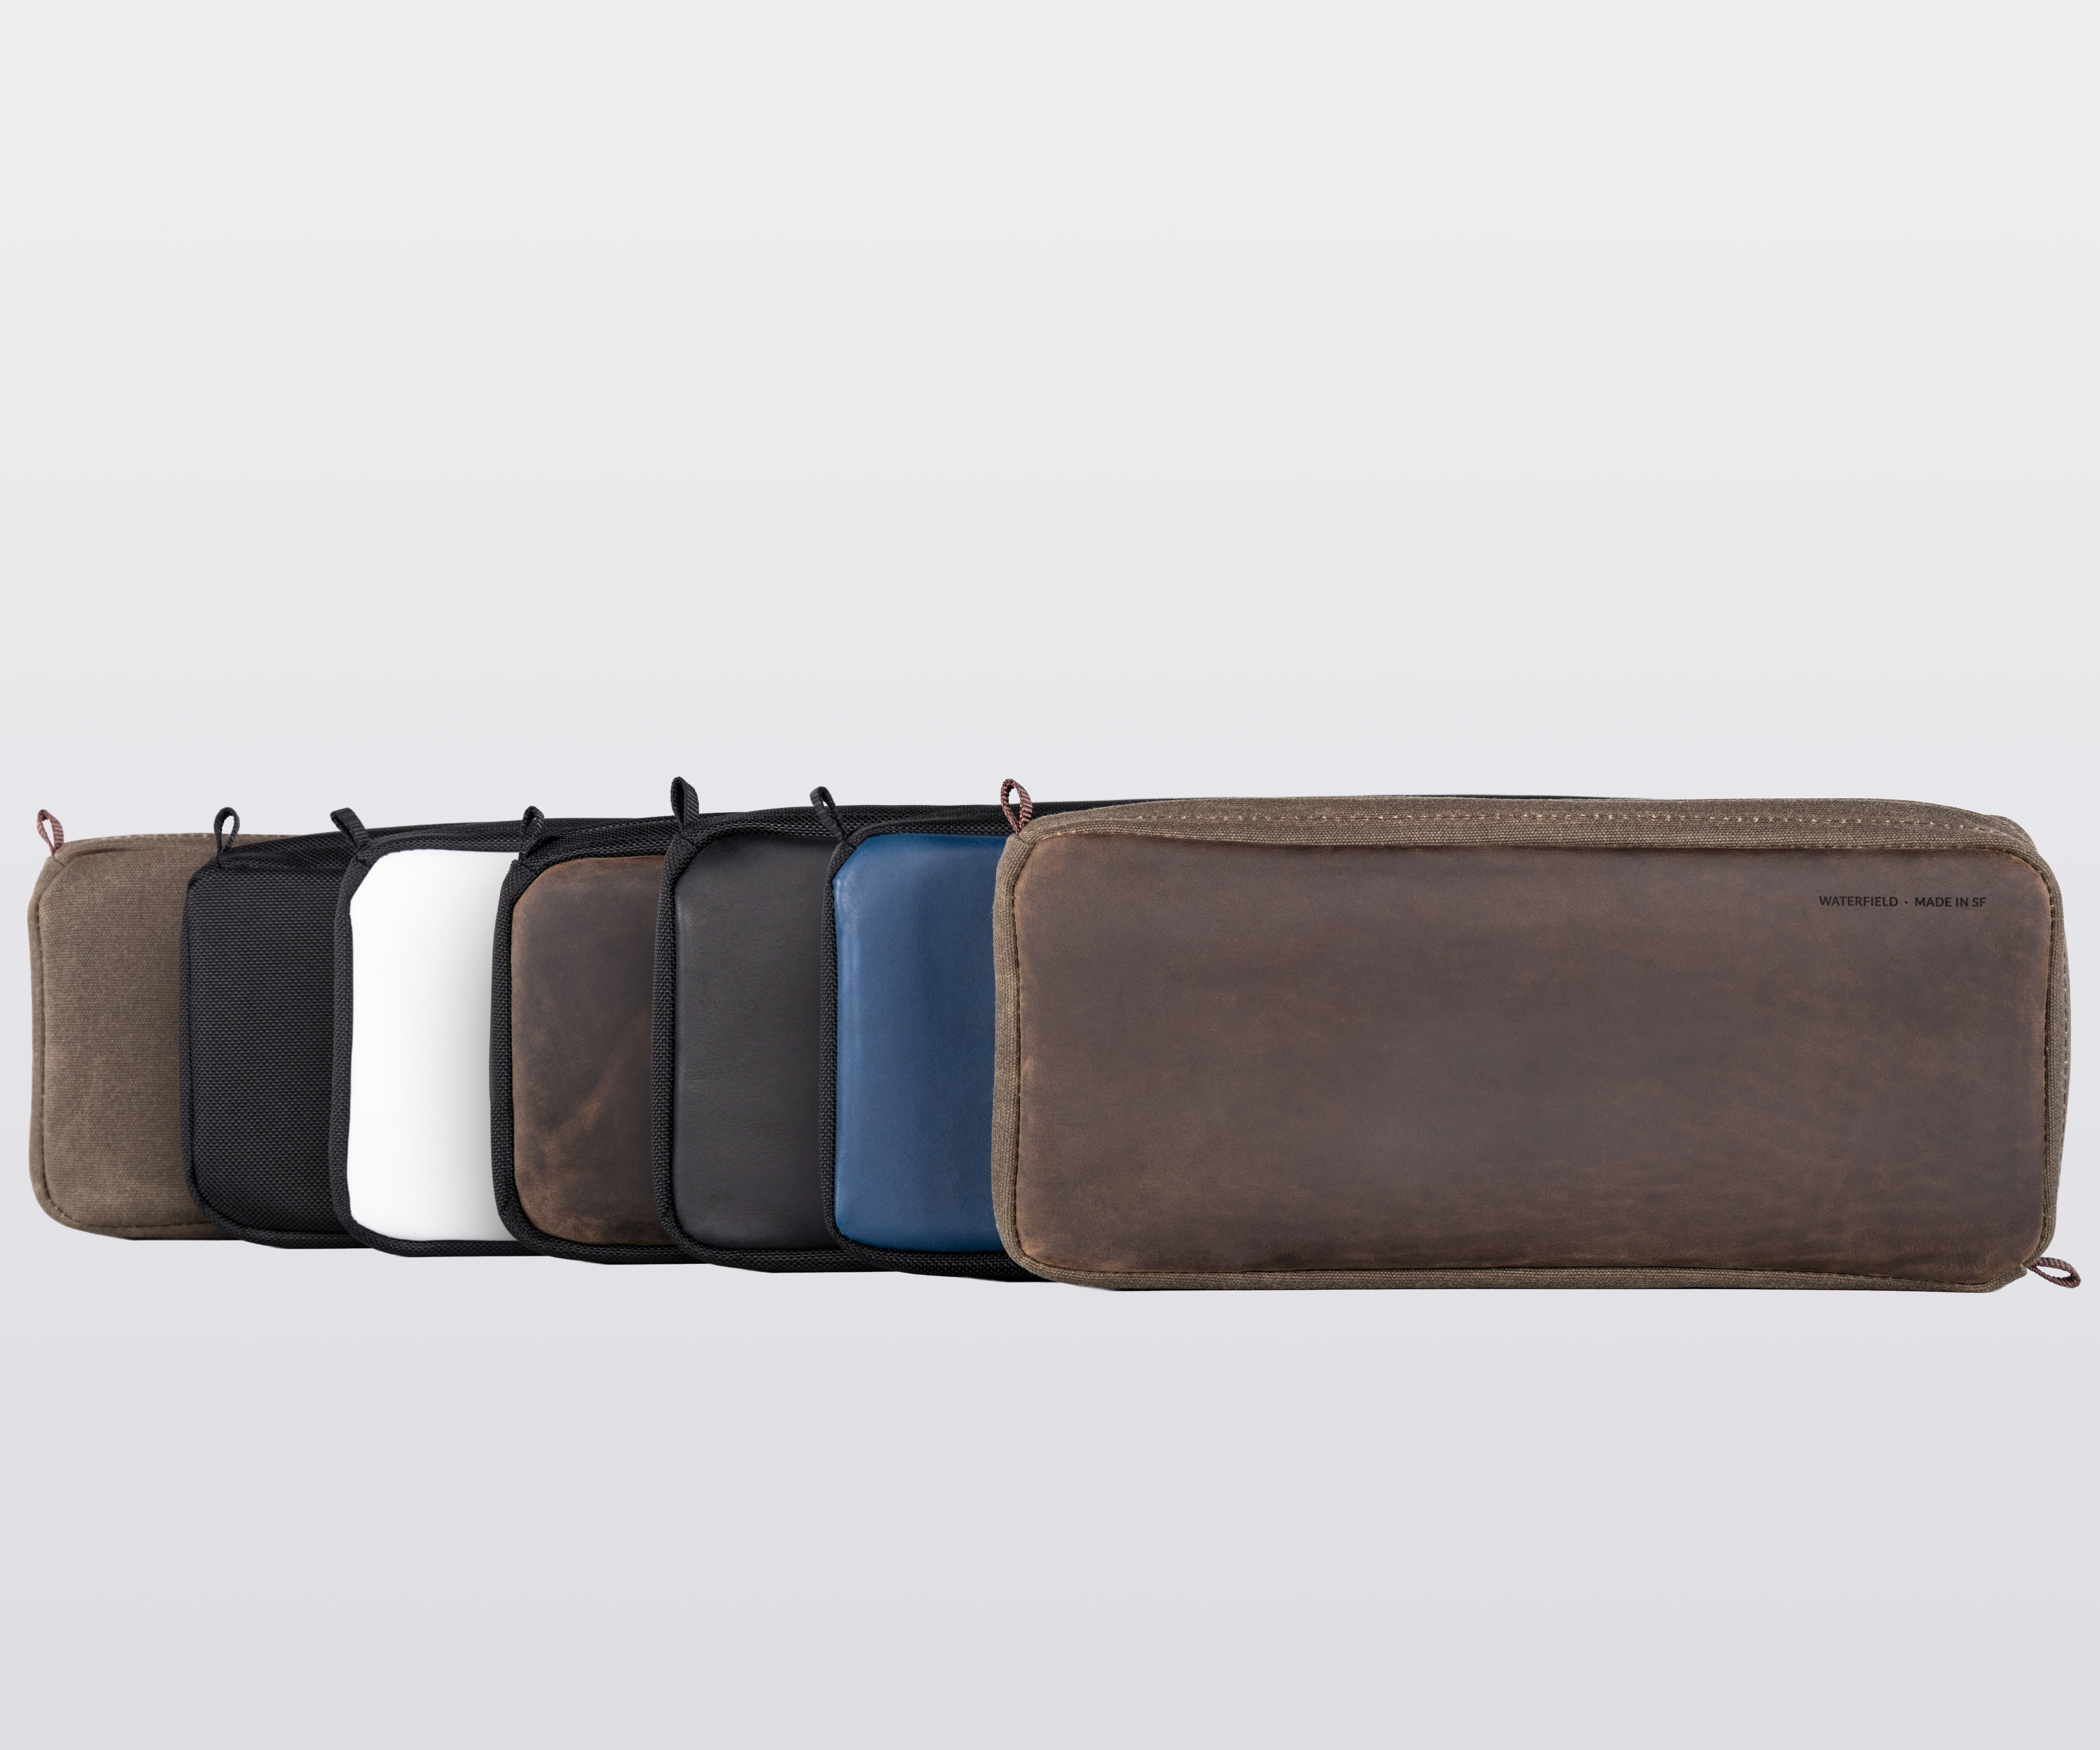 Steam Deck Magnetic Case colorway choices